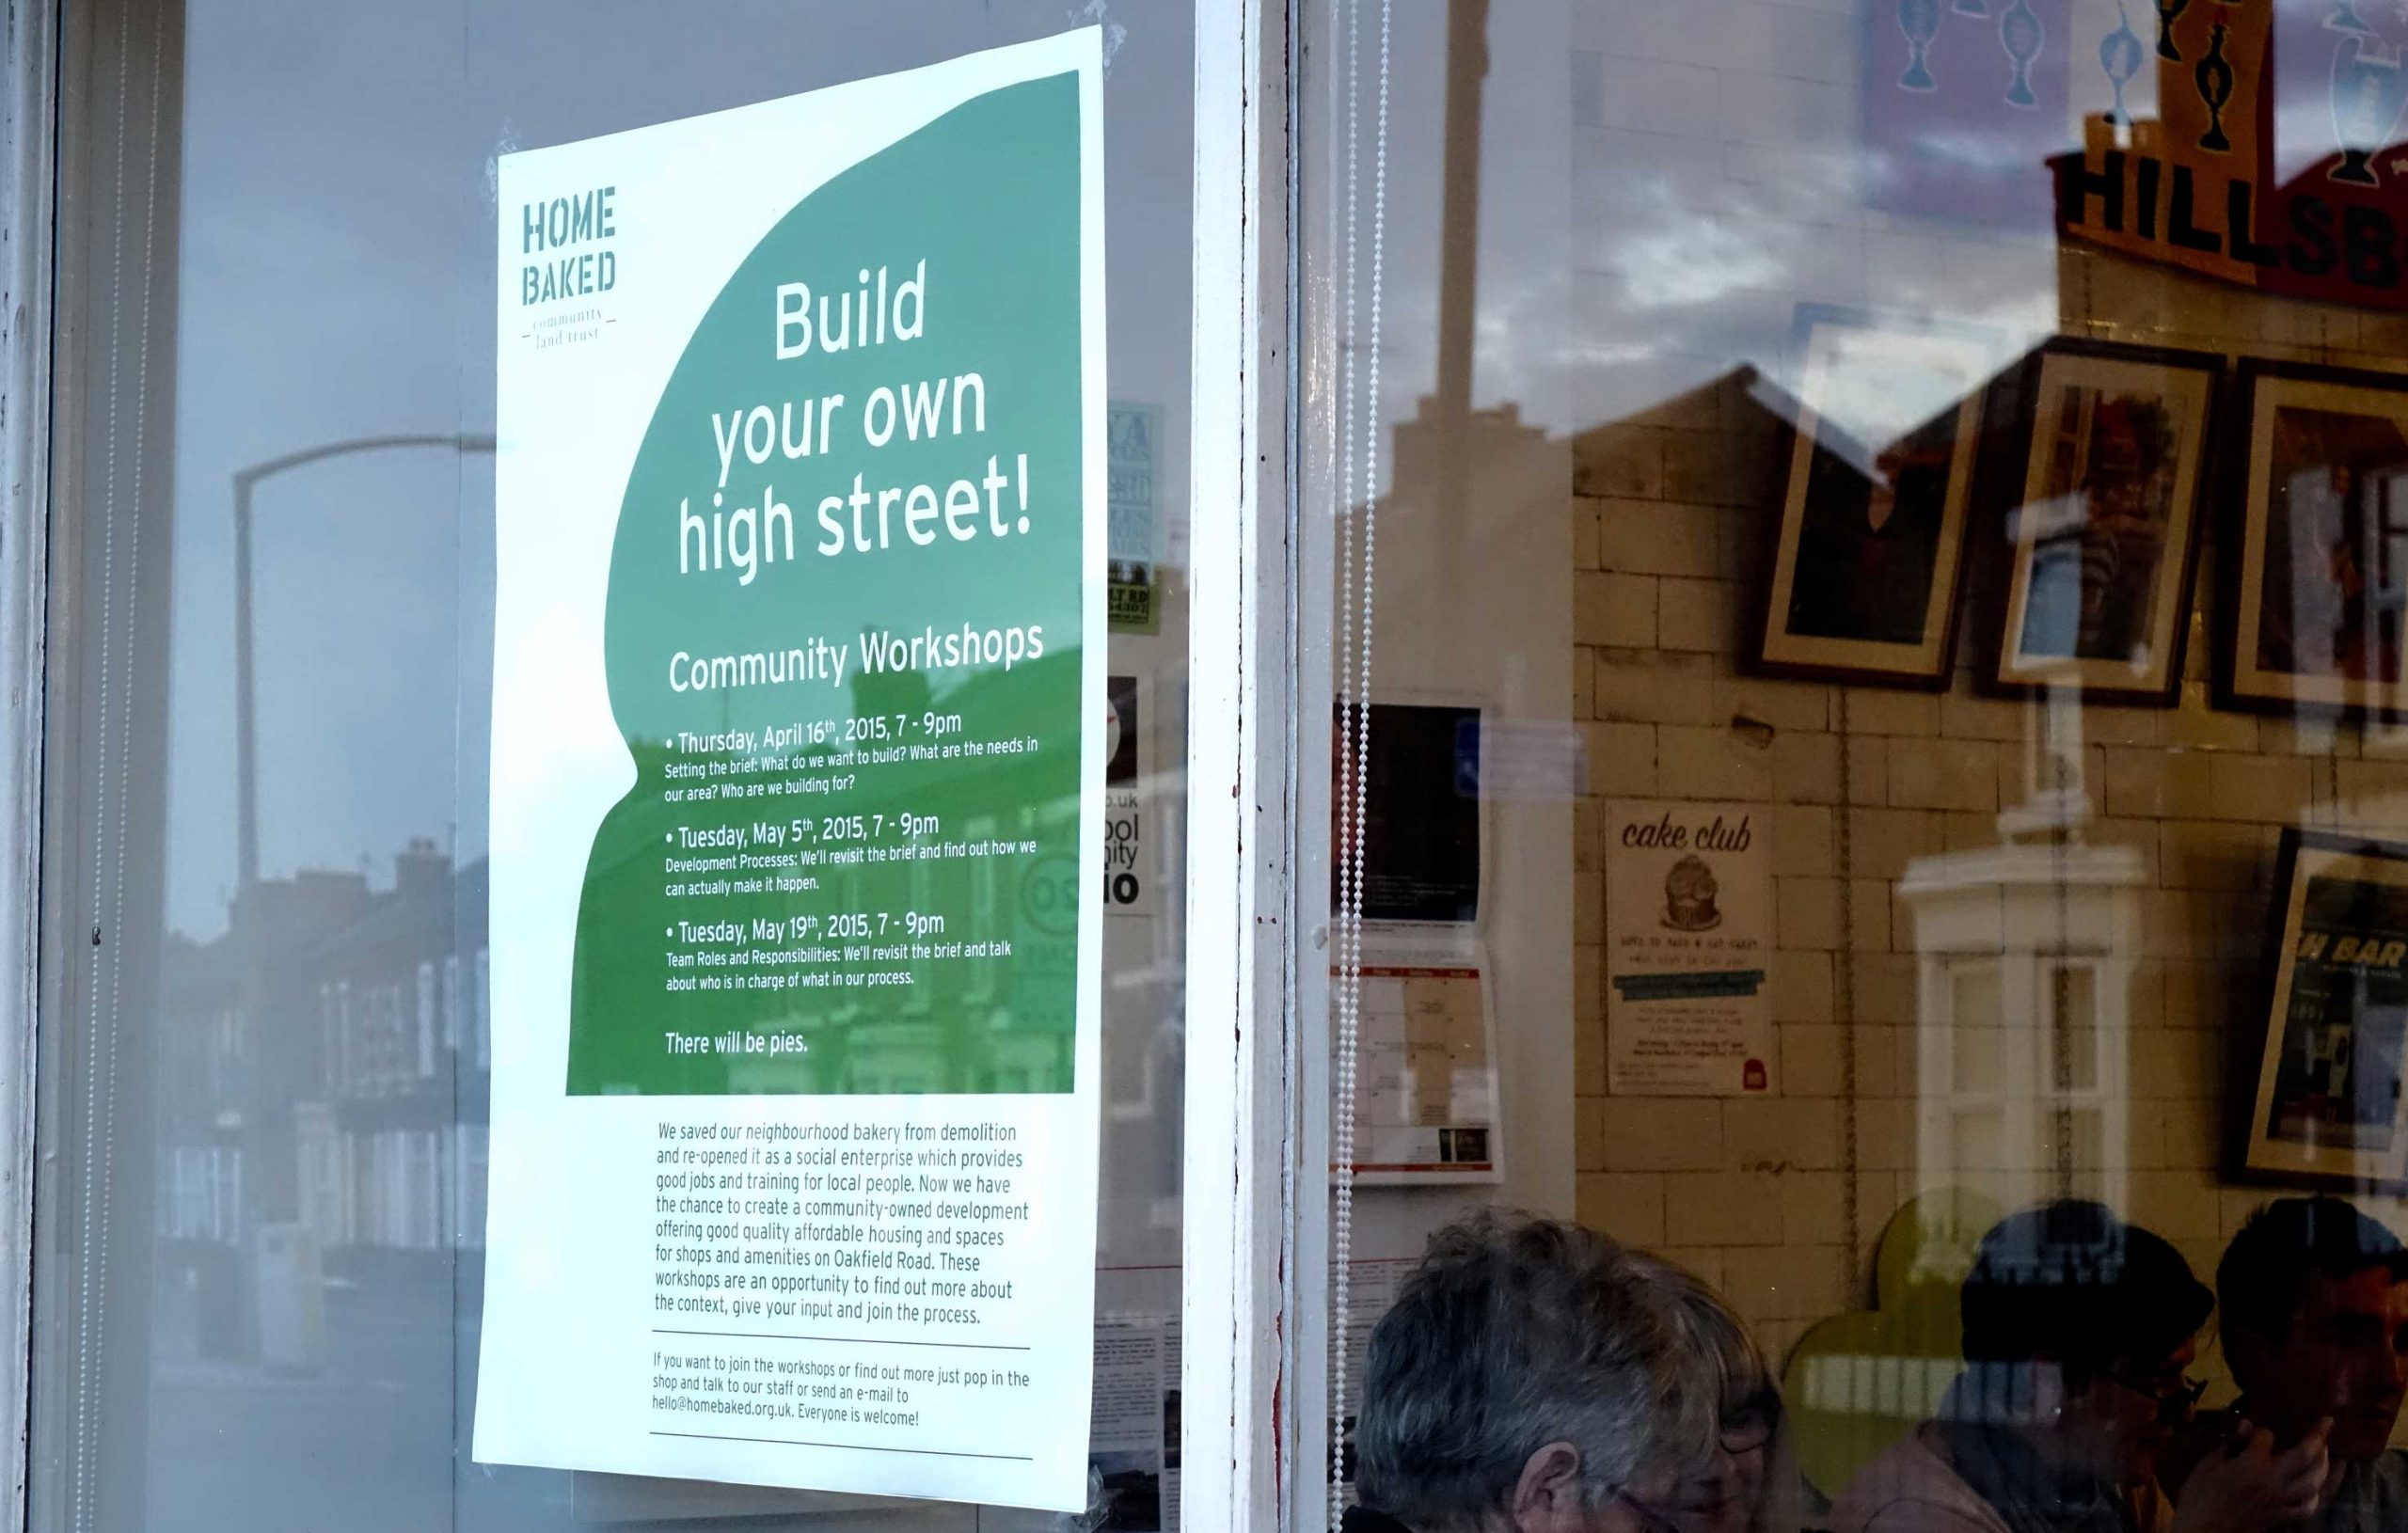 Poster reads: "Build your own high street! Community Workshops" and goes on to detail the dates and times of several workshops by Home Baked.